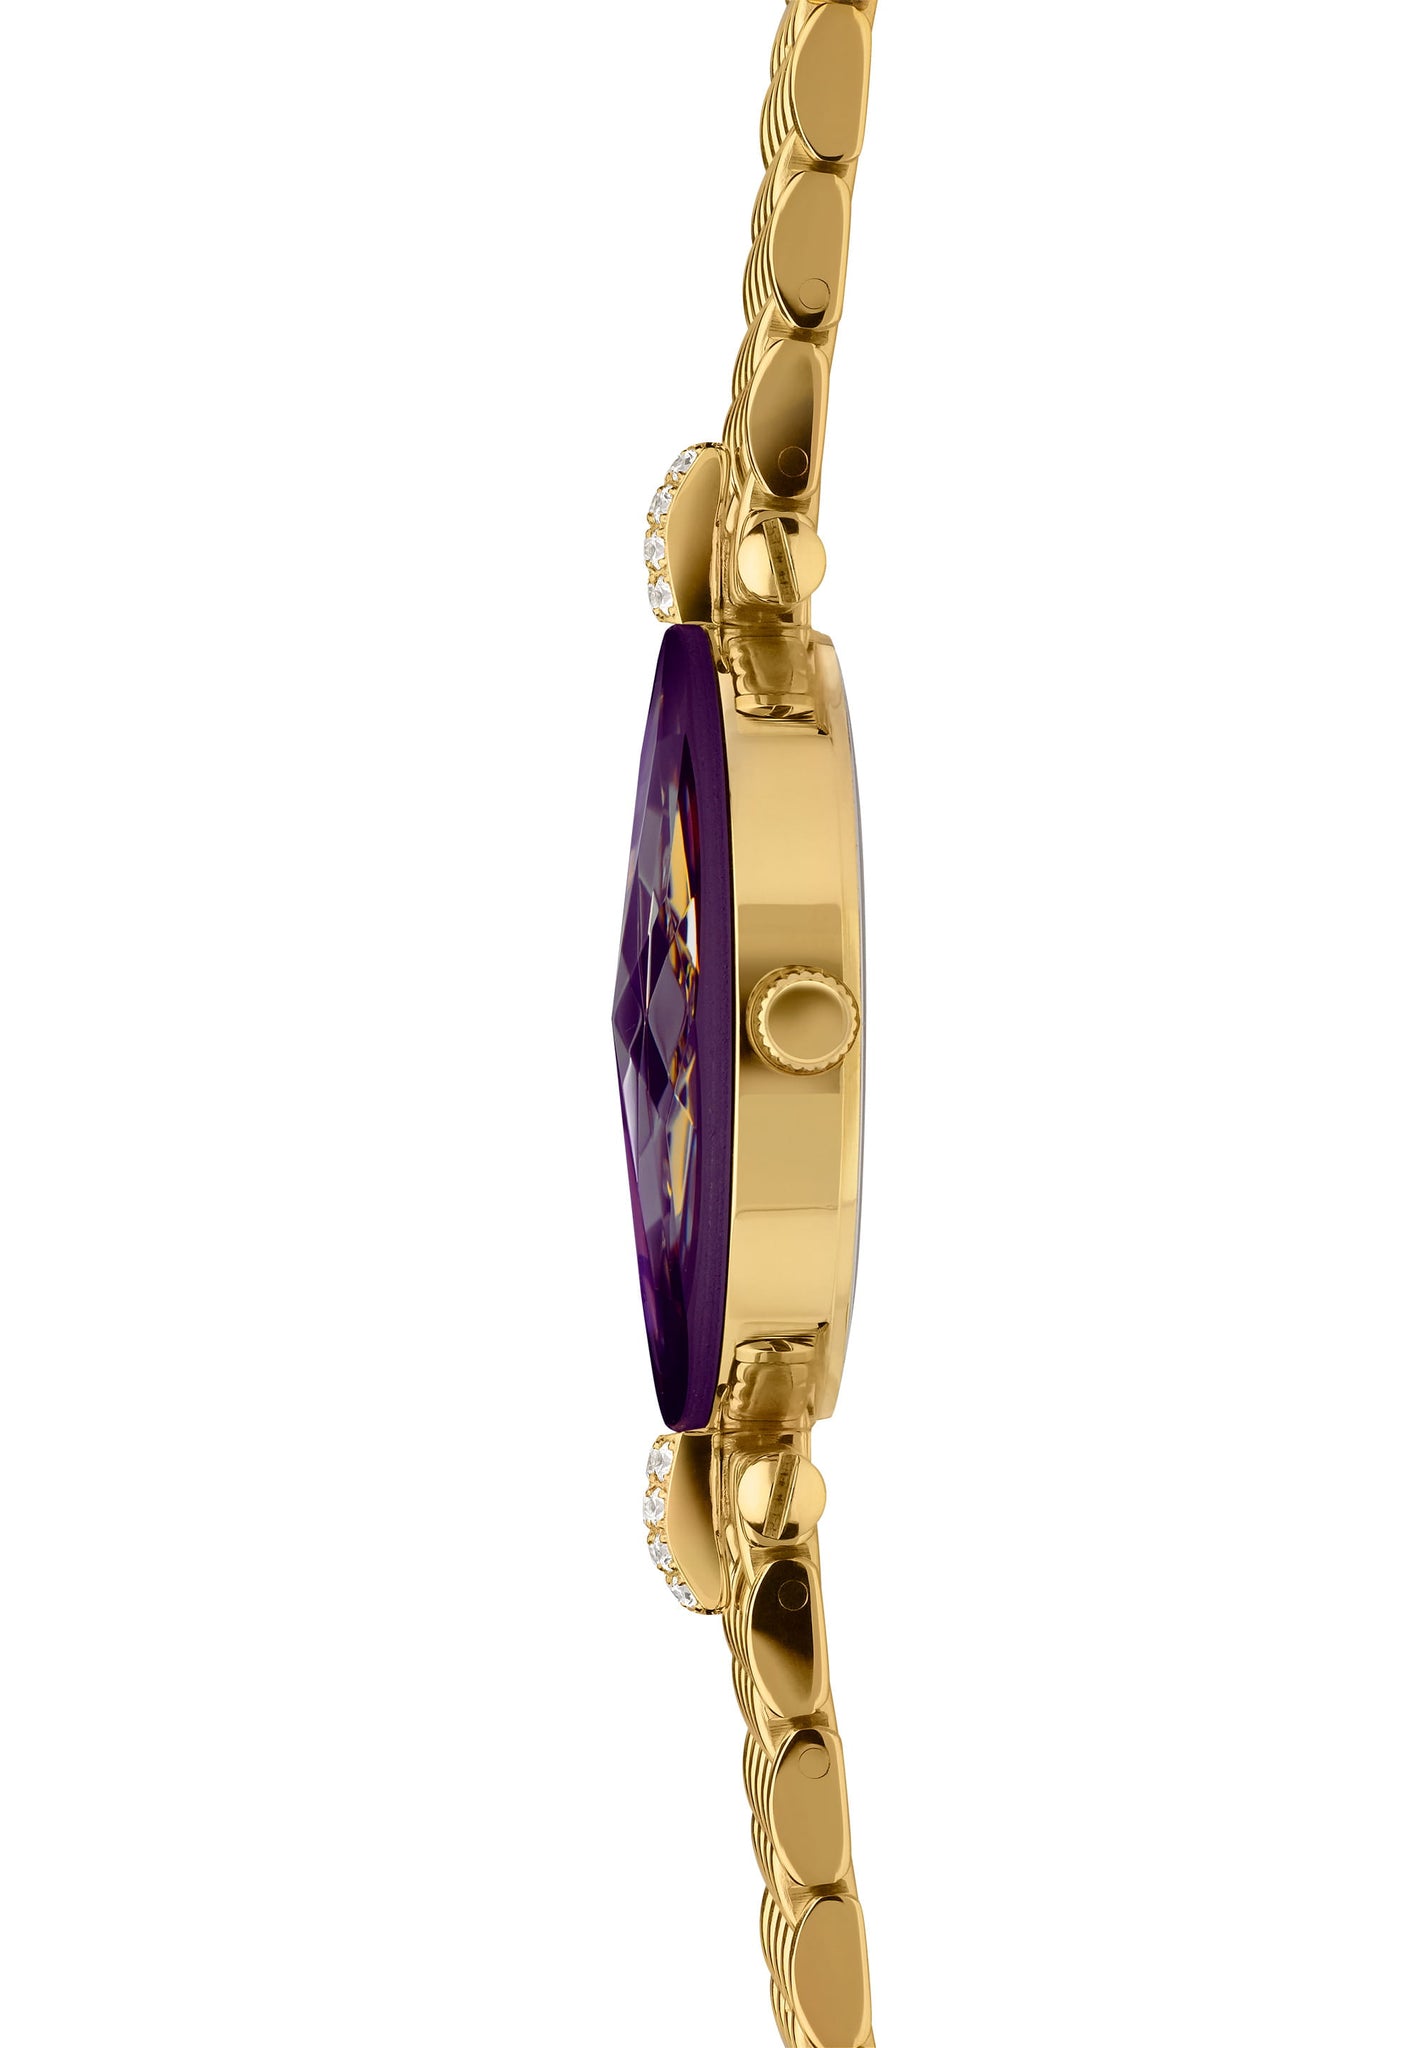 Facet Strass Reloj Mujer Suizo J5.631.M